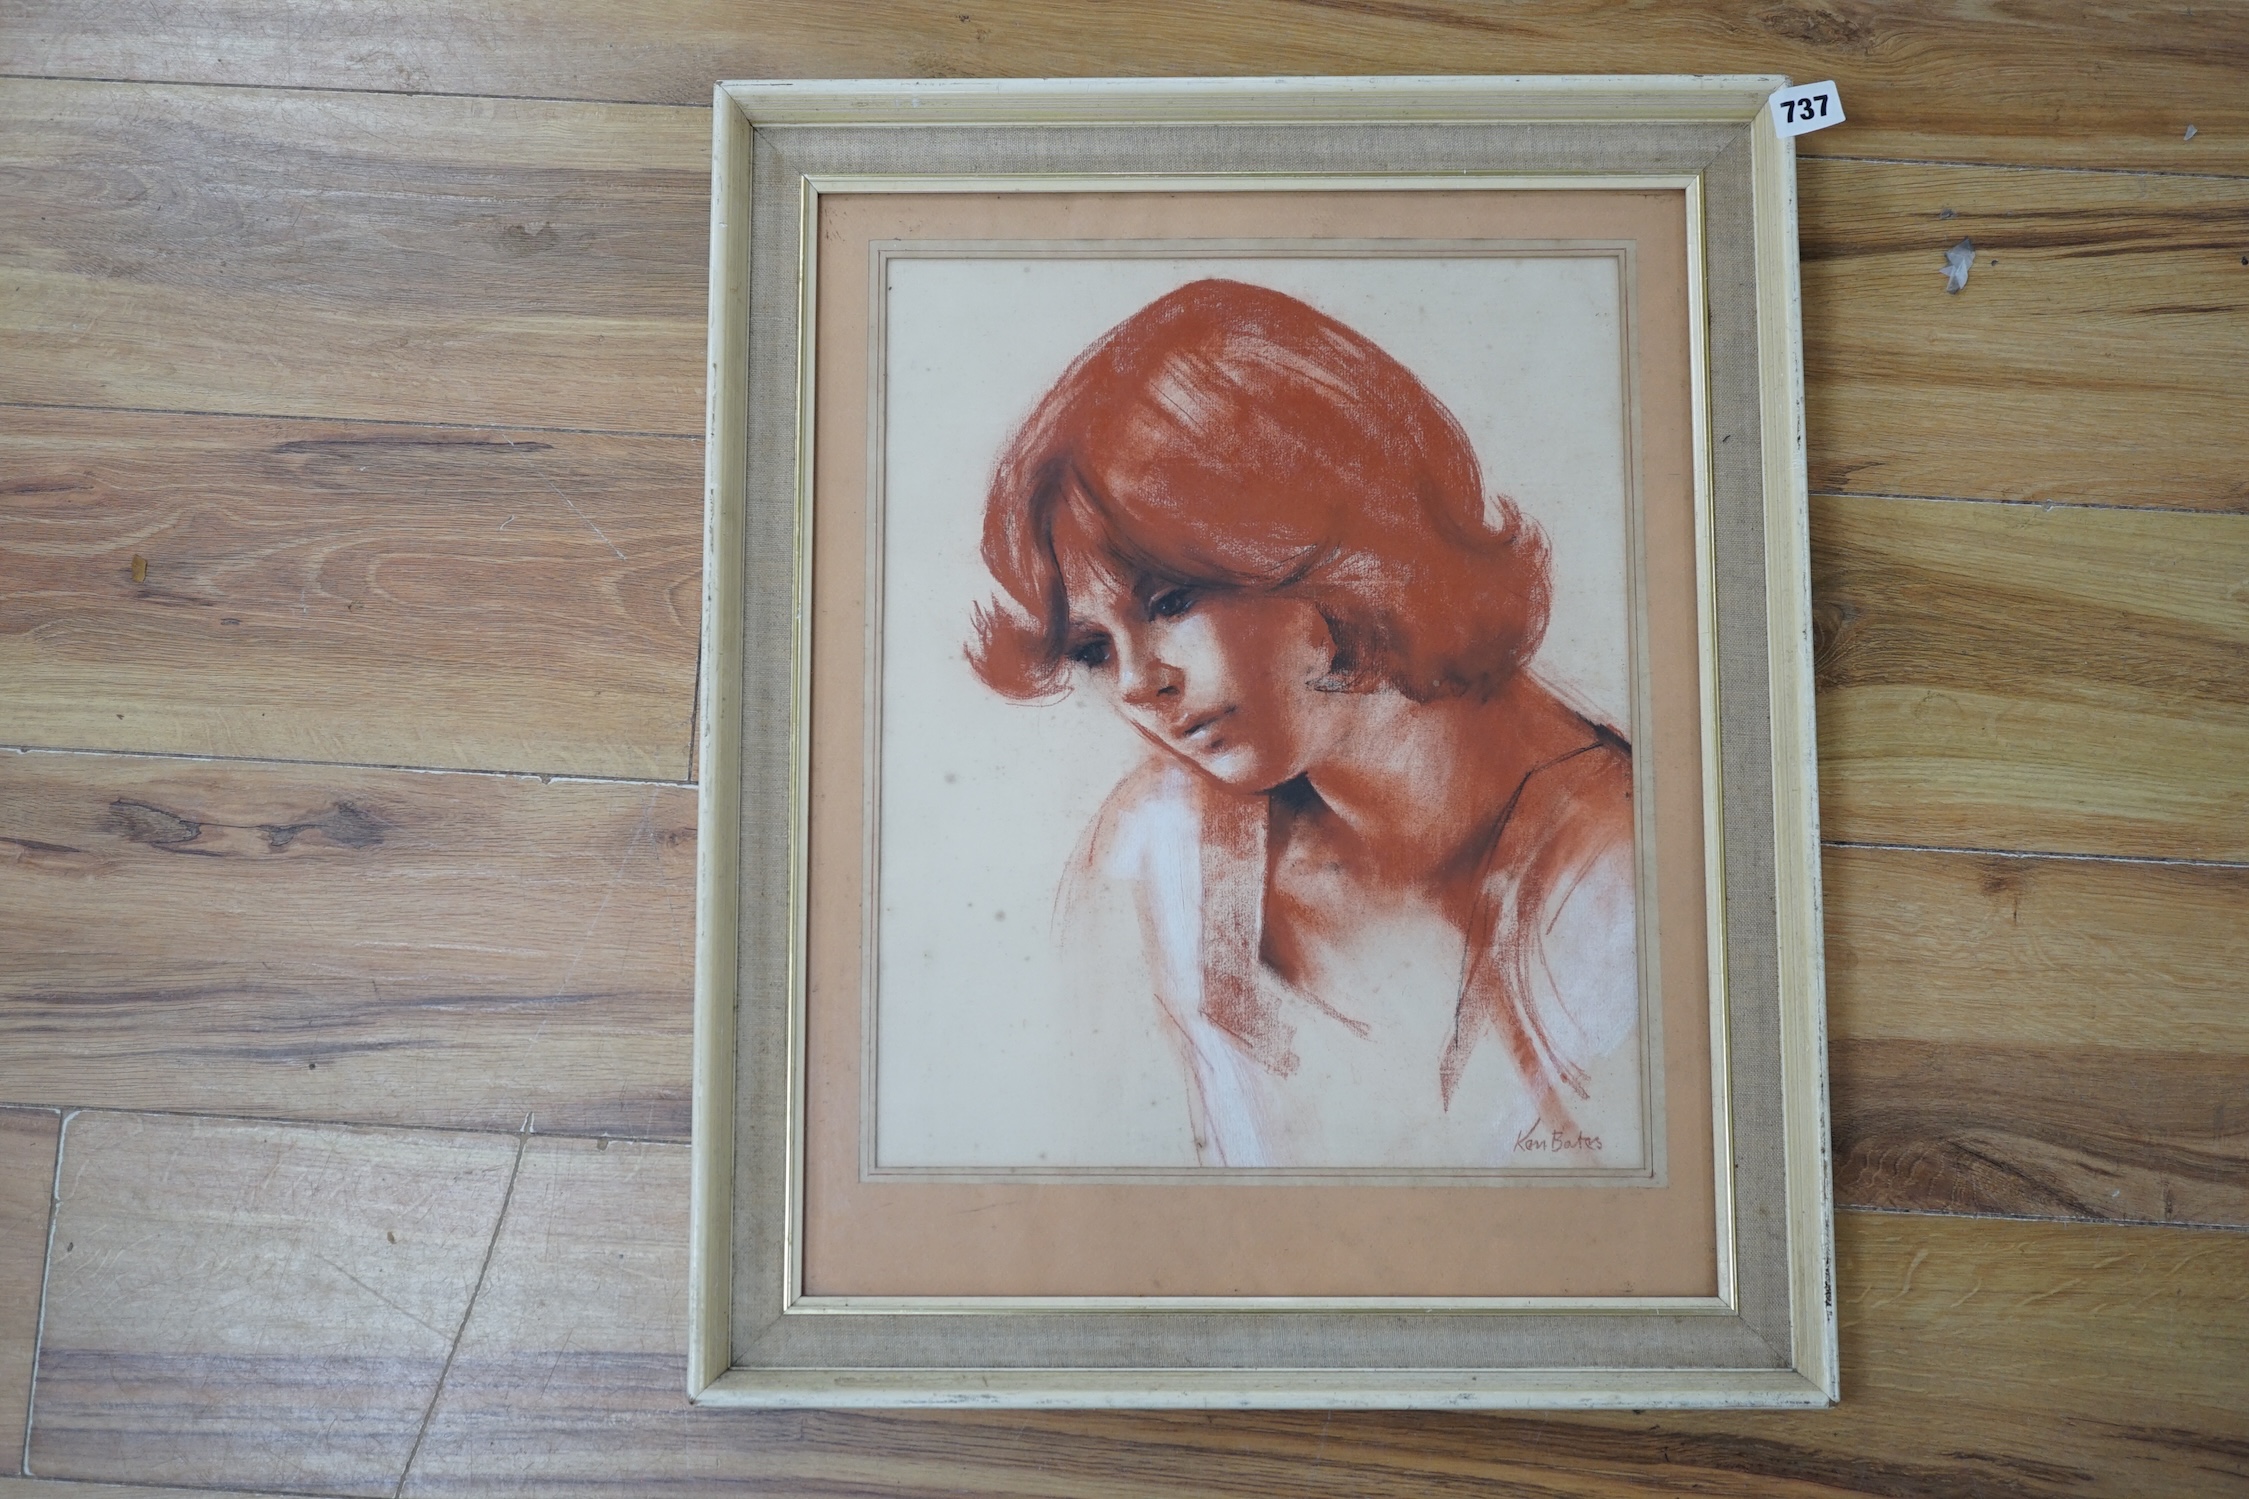 Ken Bates, red chalk, 'Fiona Hughes - Winter', signed, 40 x 33cm. Condition - poor to fair, in need of a clean